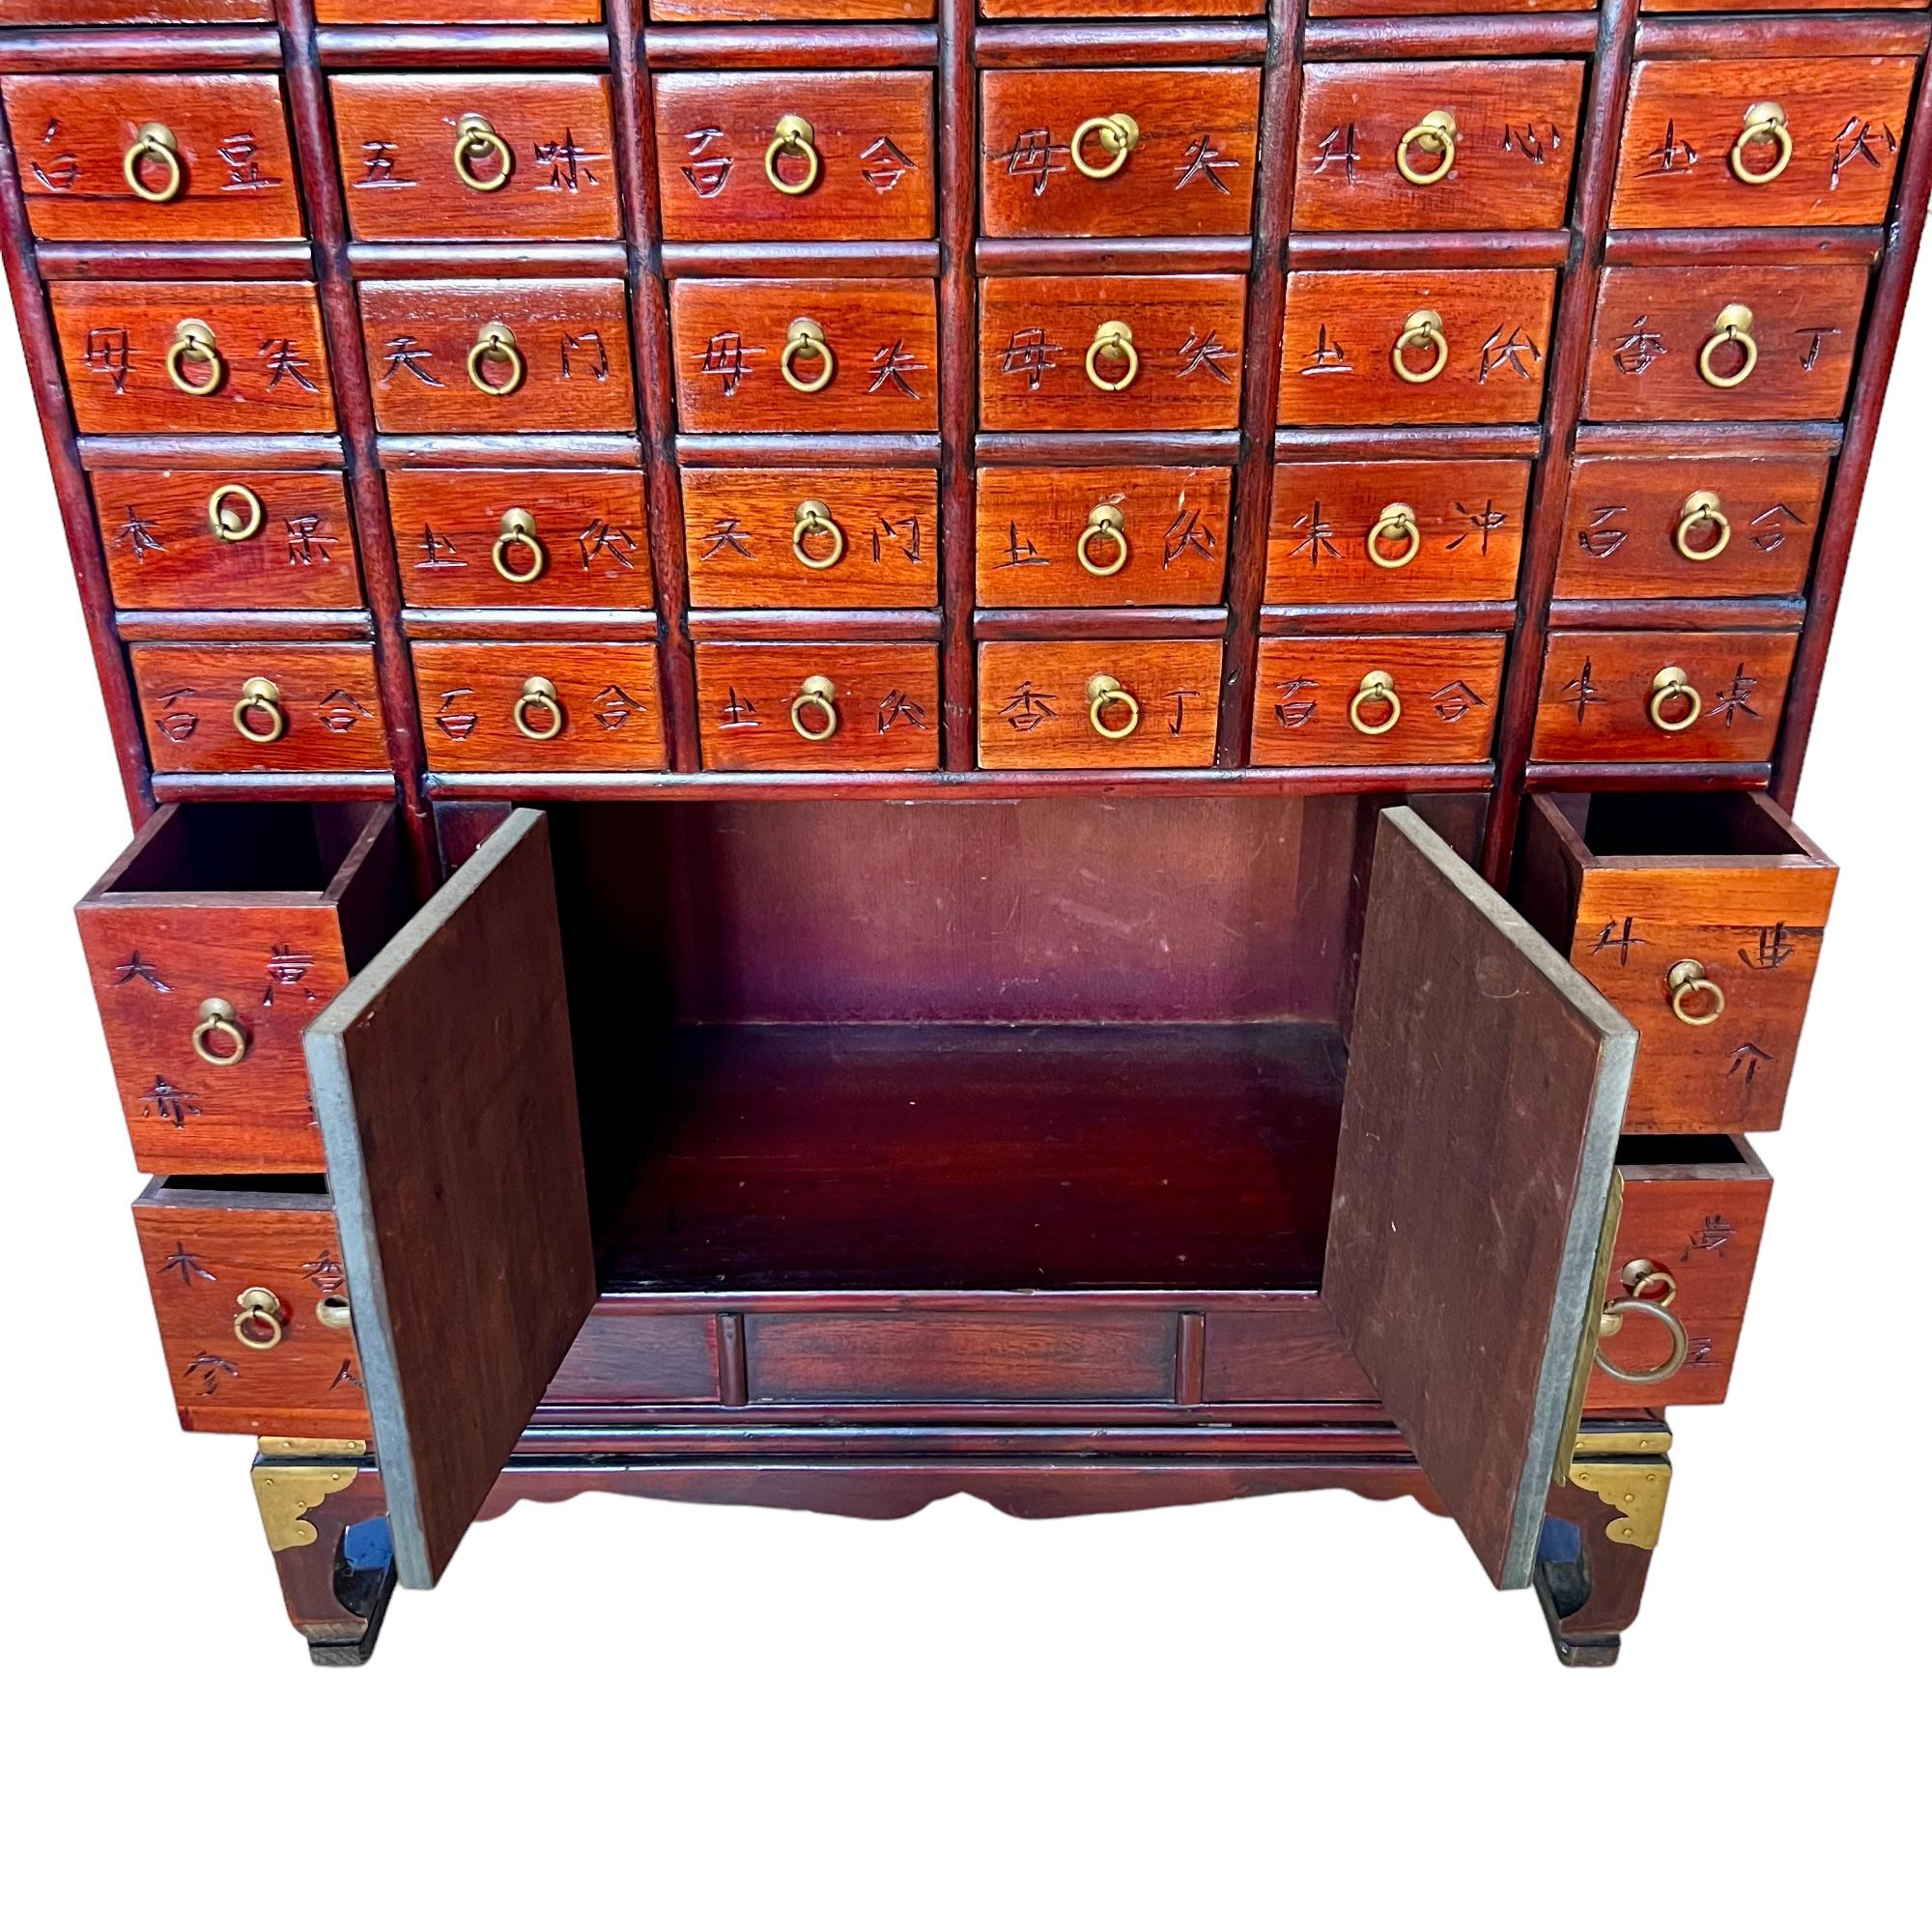 Chinese Lingerie Chest and Korean Apothecary Cabinet, a Set 12